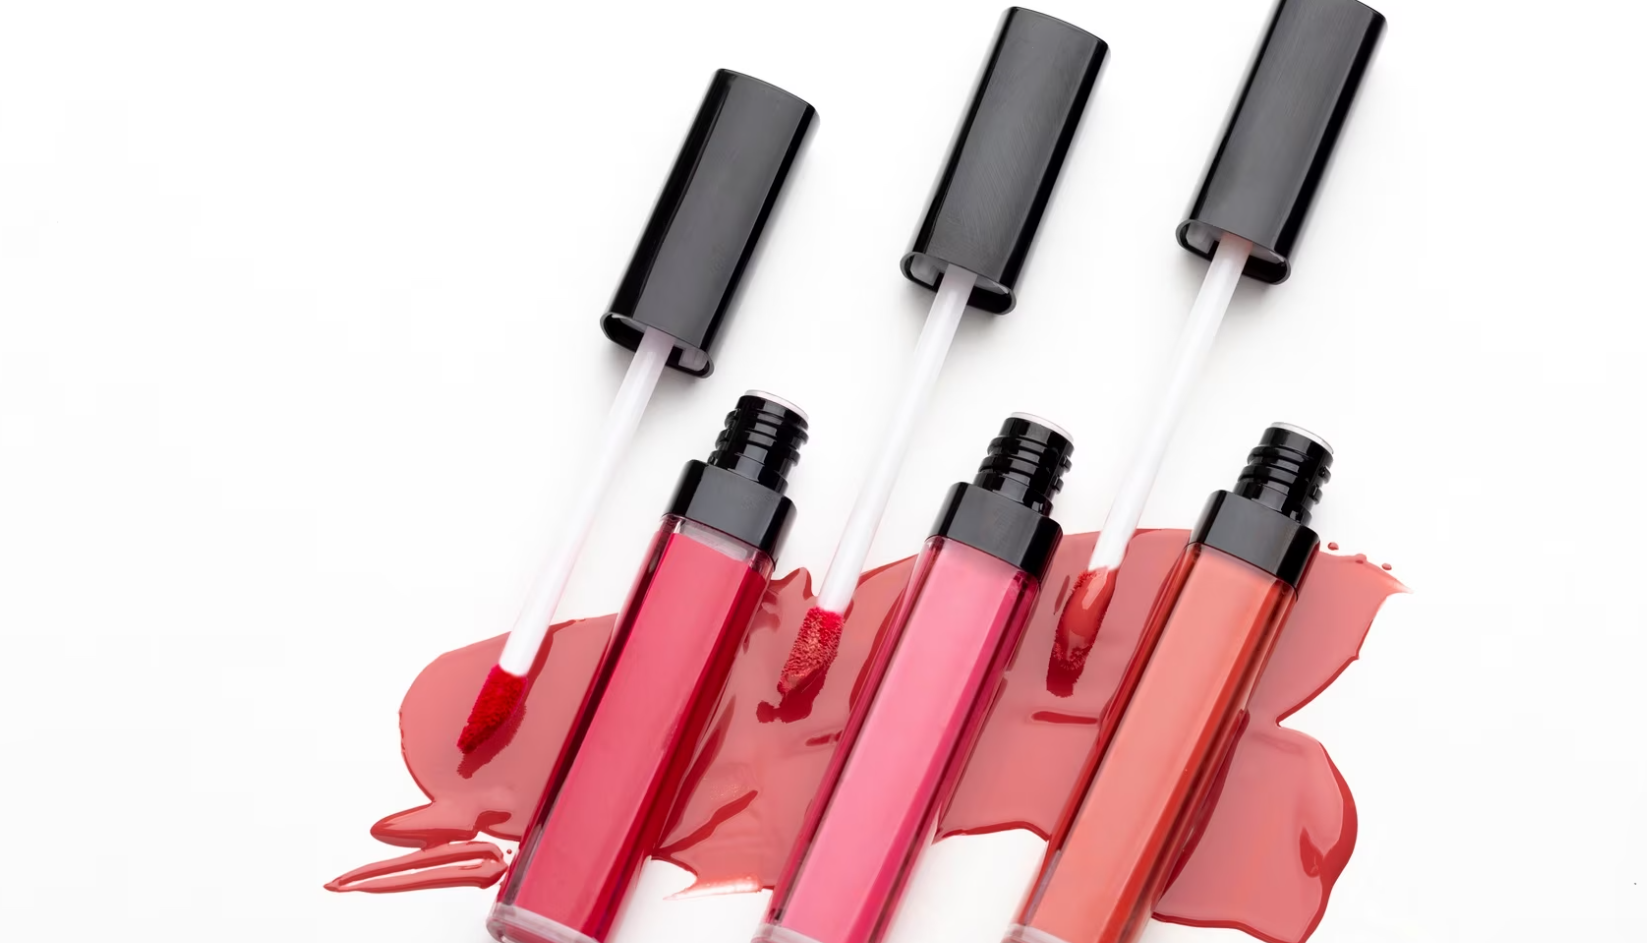 The role of packaging in influencing consumer purchase decisions for lip gloss products